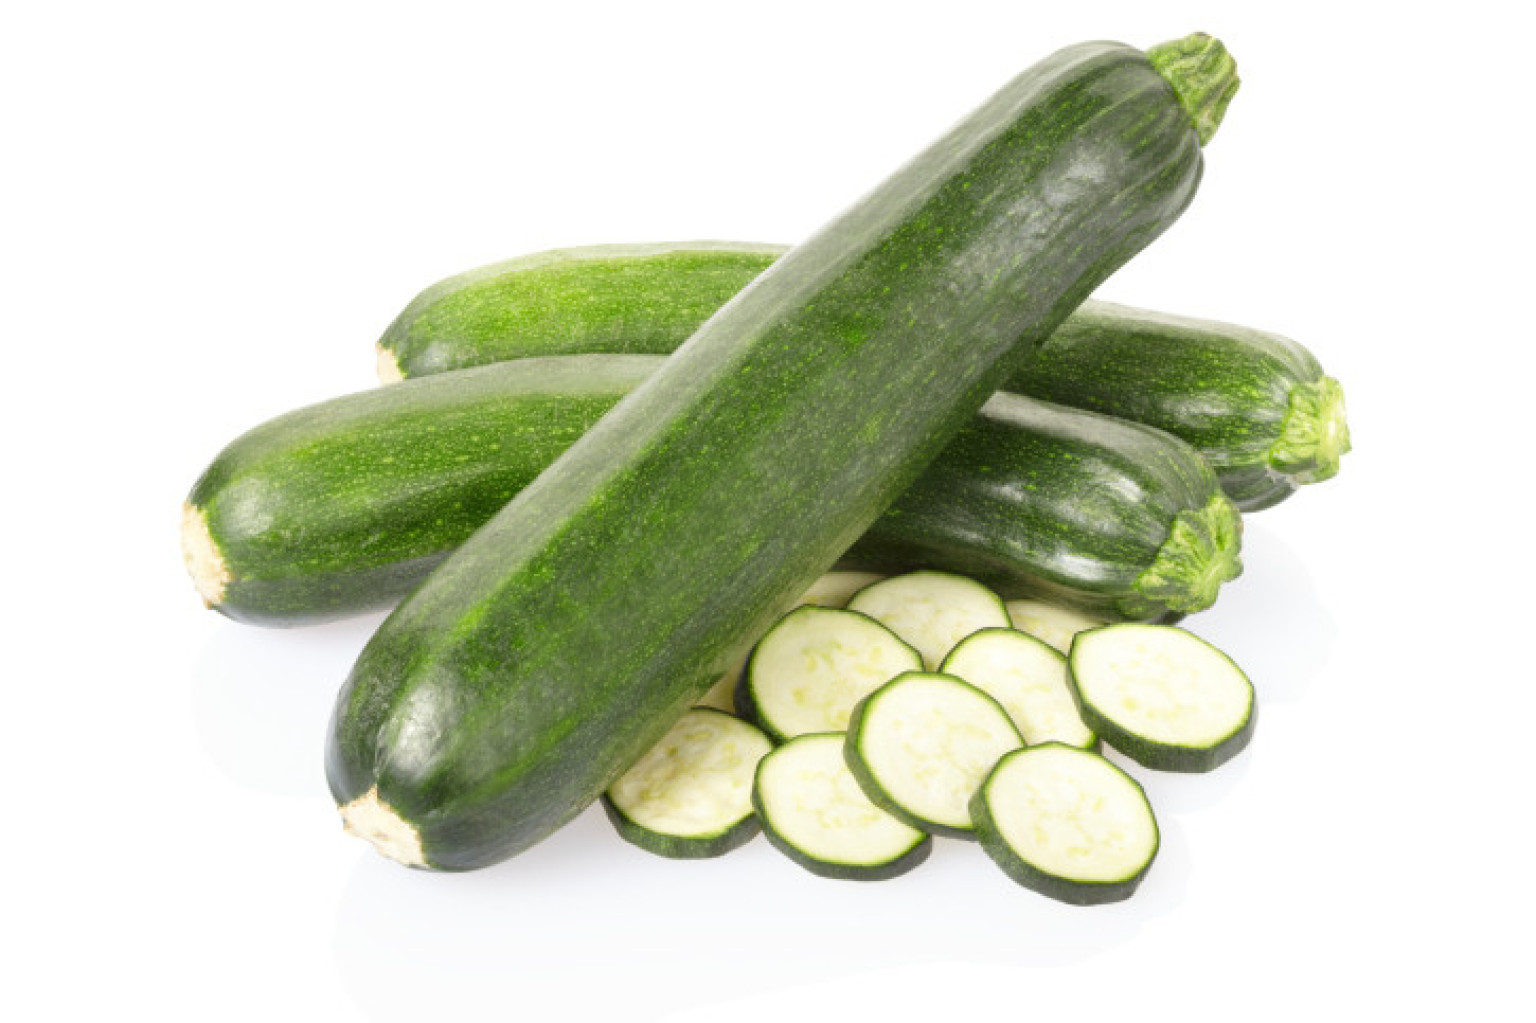 Zucchini or courgettes